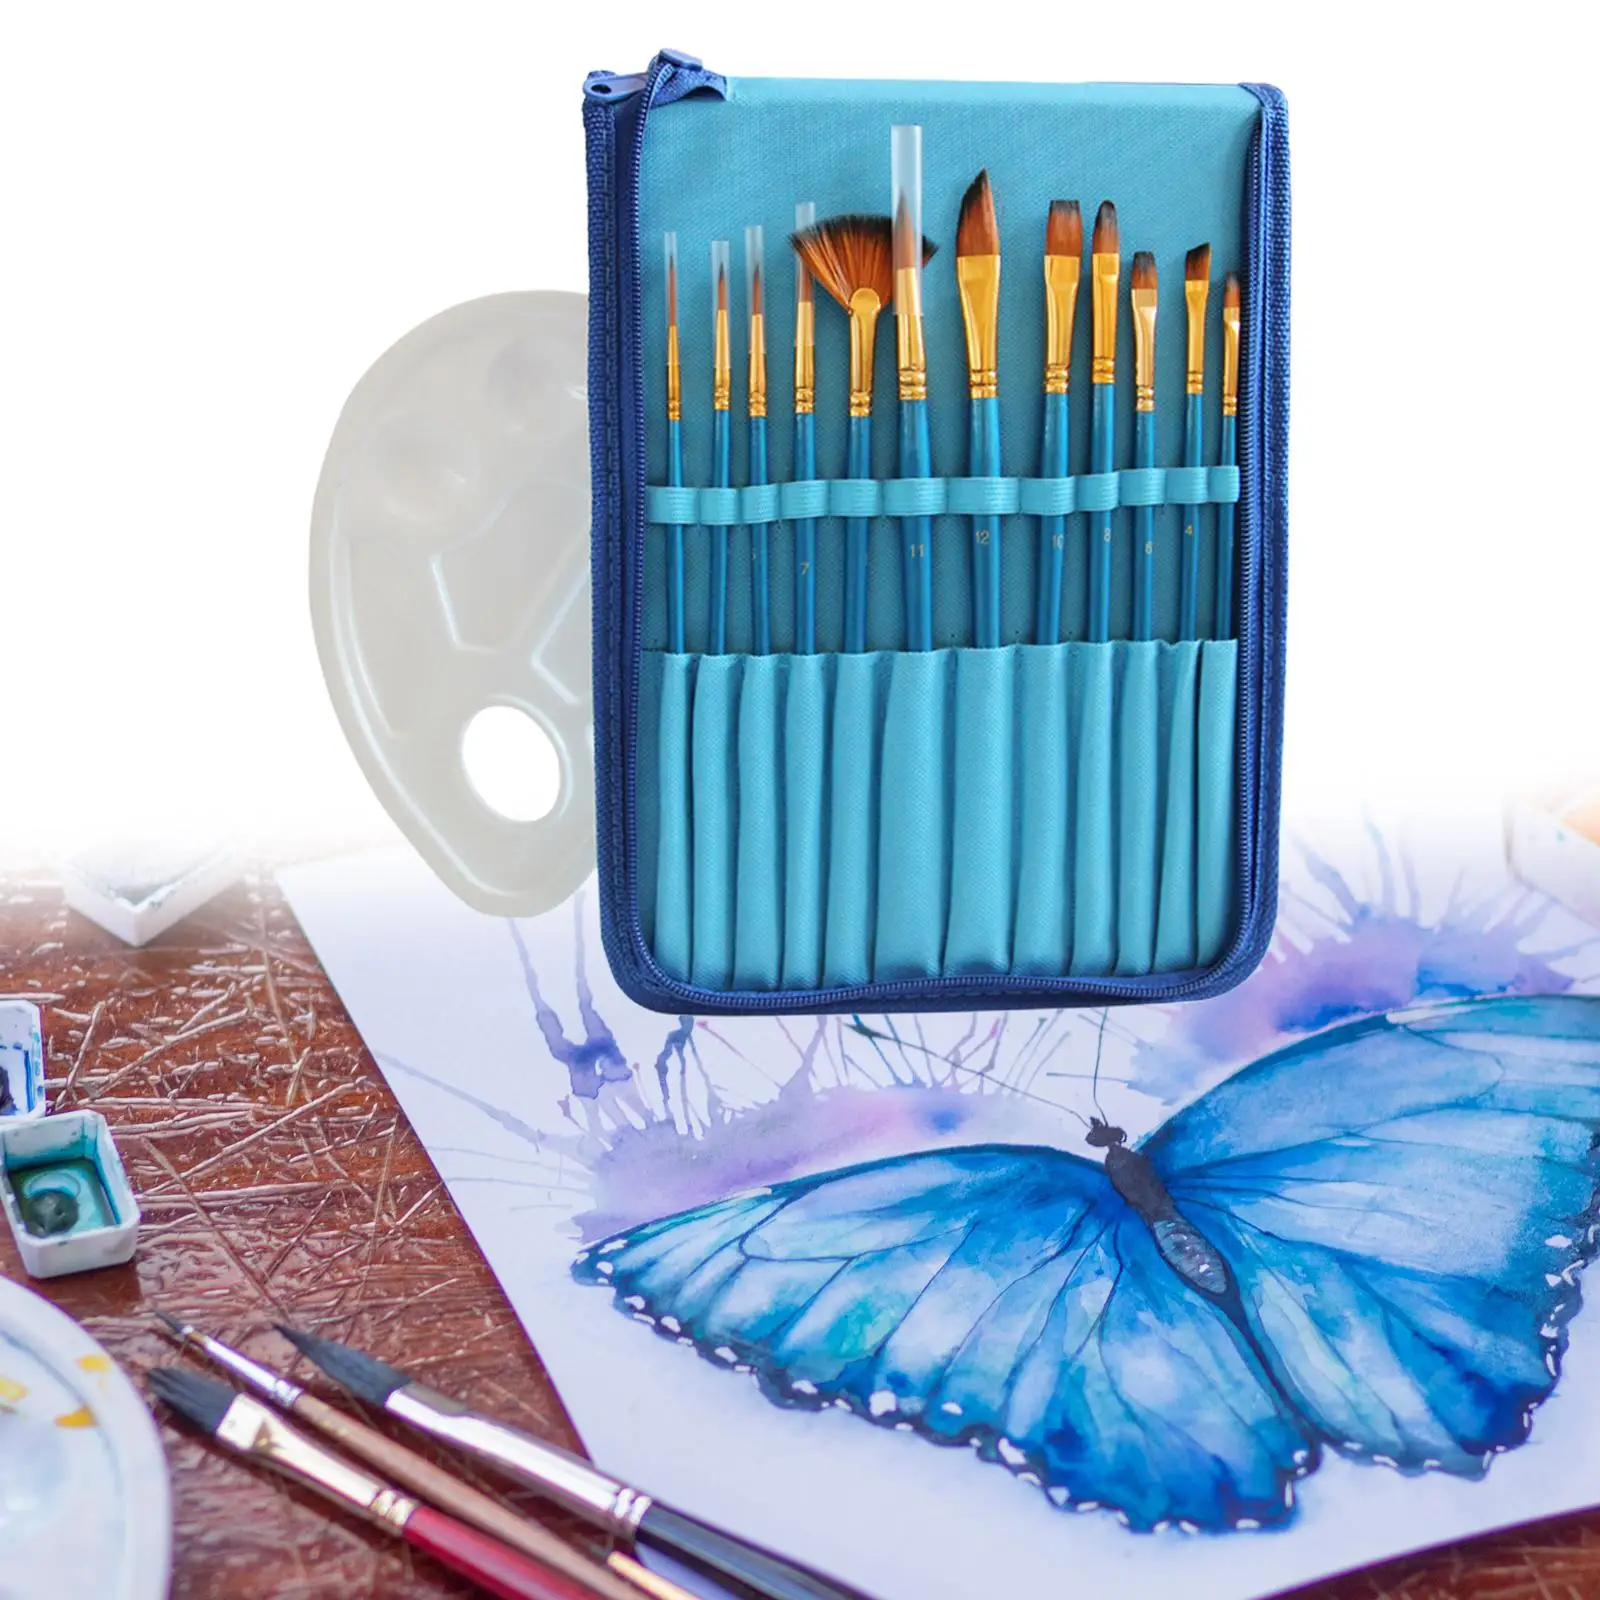 Paint Brush Set  Brushes , Adults for & Fabric - for Beginners and Professionals for Oil or Acrylic Painting